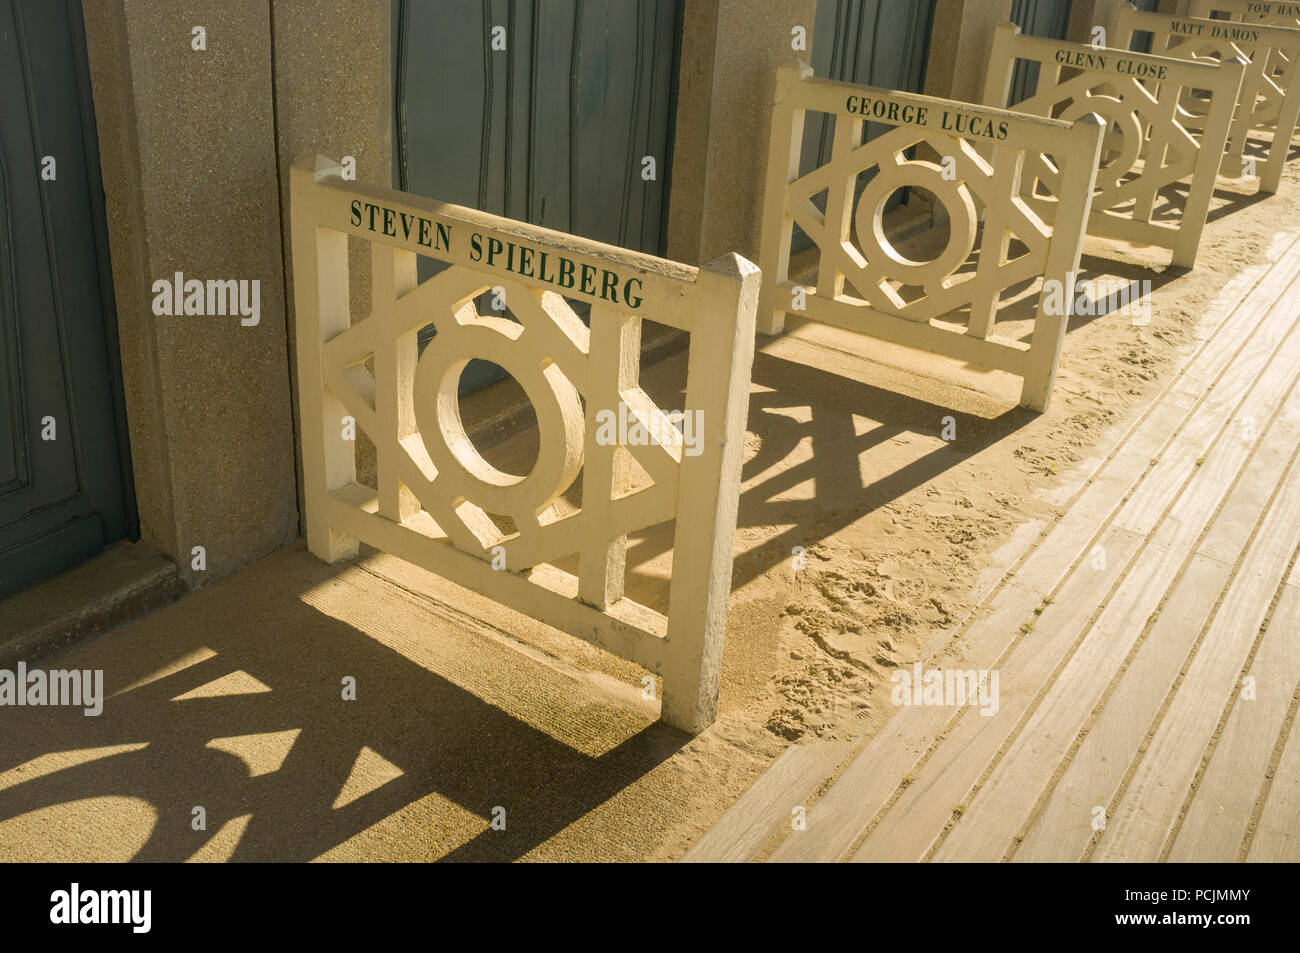 Iconic changing rooms beach cabins named after film stars on the Les Planches boardwalk in Deauville, Normandy, France. Stock Photo